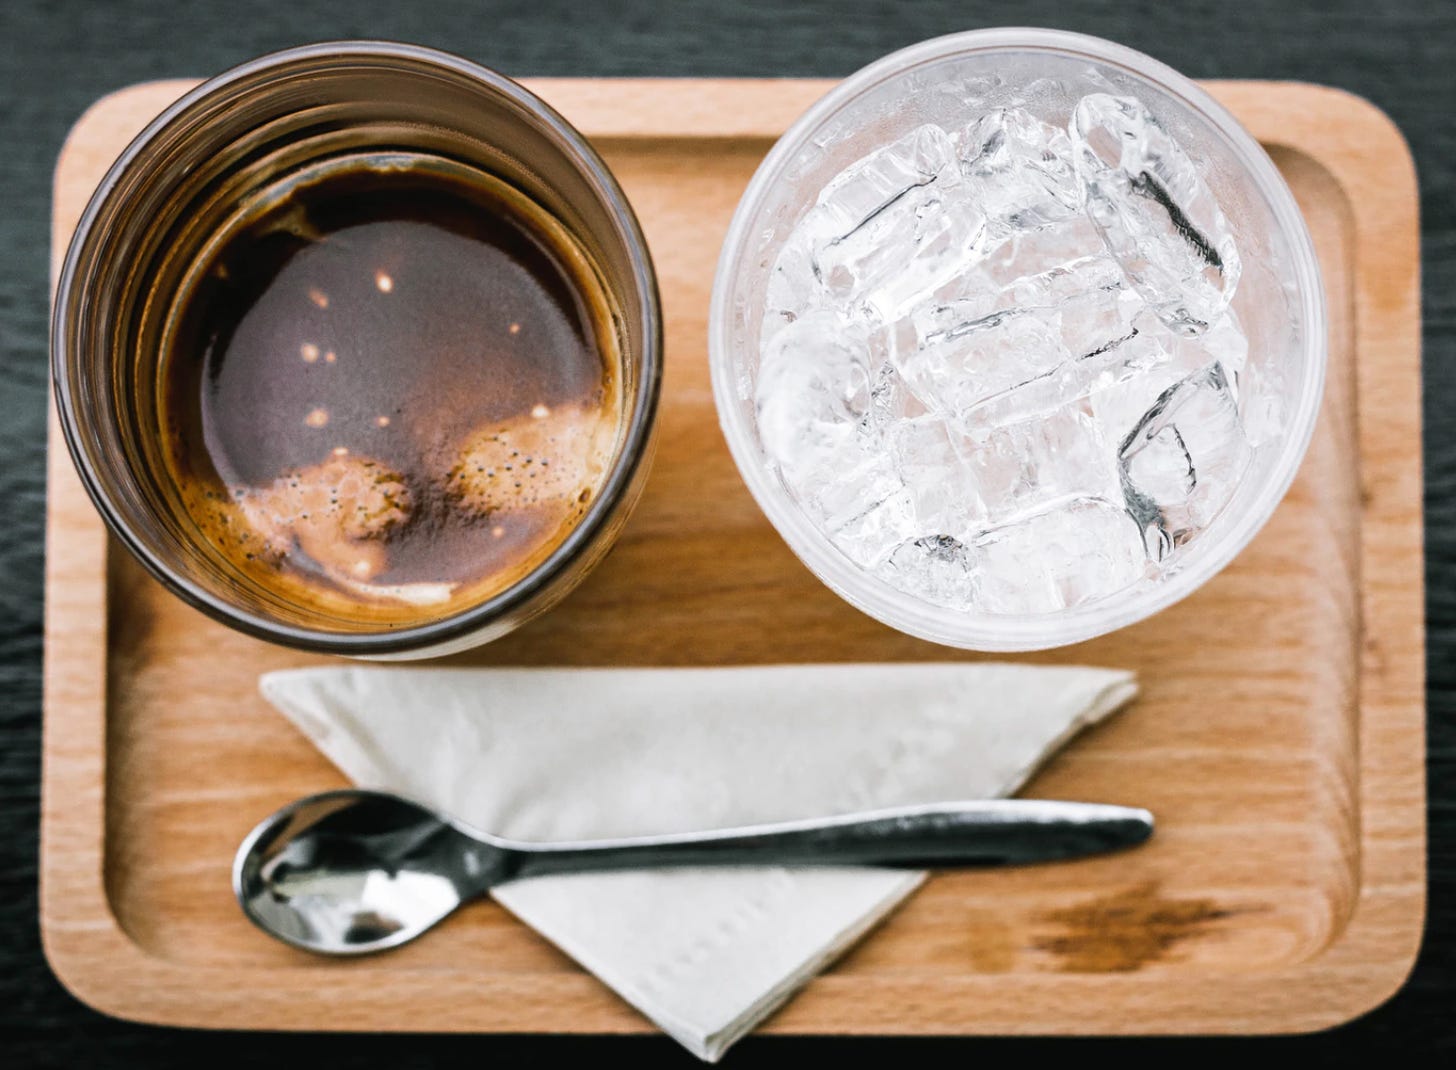 Top view of an espresso on the left and a cup of ice on the right and a silver stirring spoon on a white napkin at the bottom of the image. They sit on a blonde wood tray.